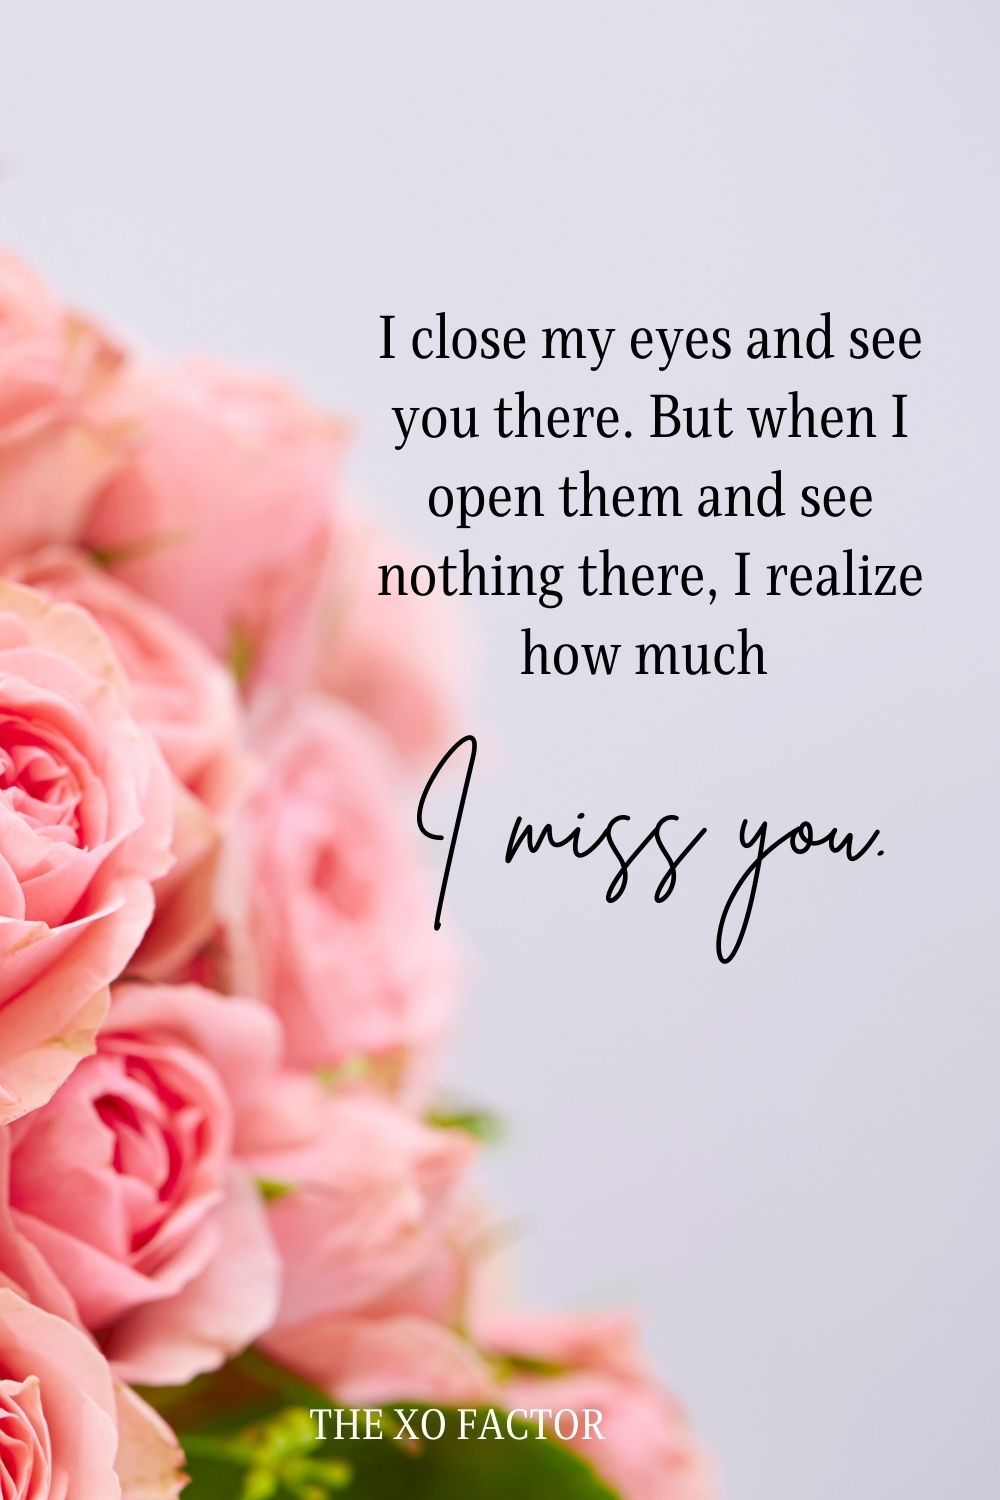 I close my eyes and see you there. But when I open them and see nothing there, I realize how much I miss you. i miss you messages